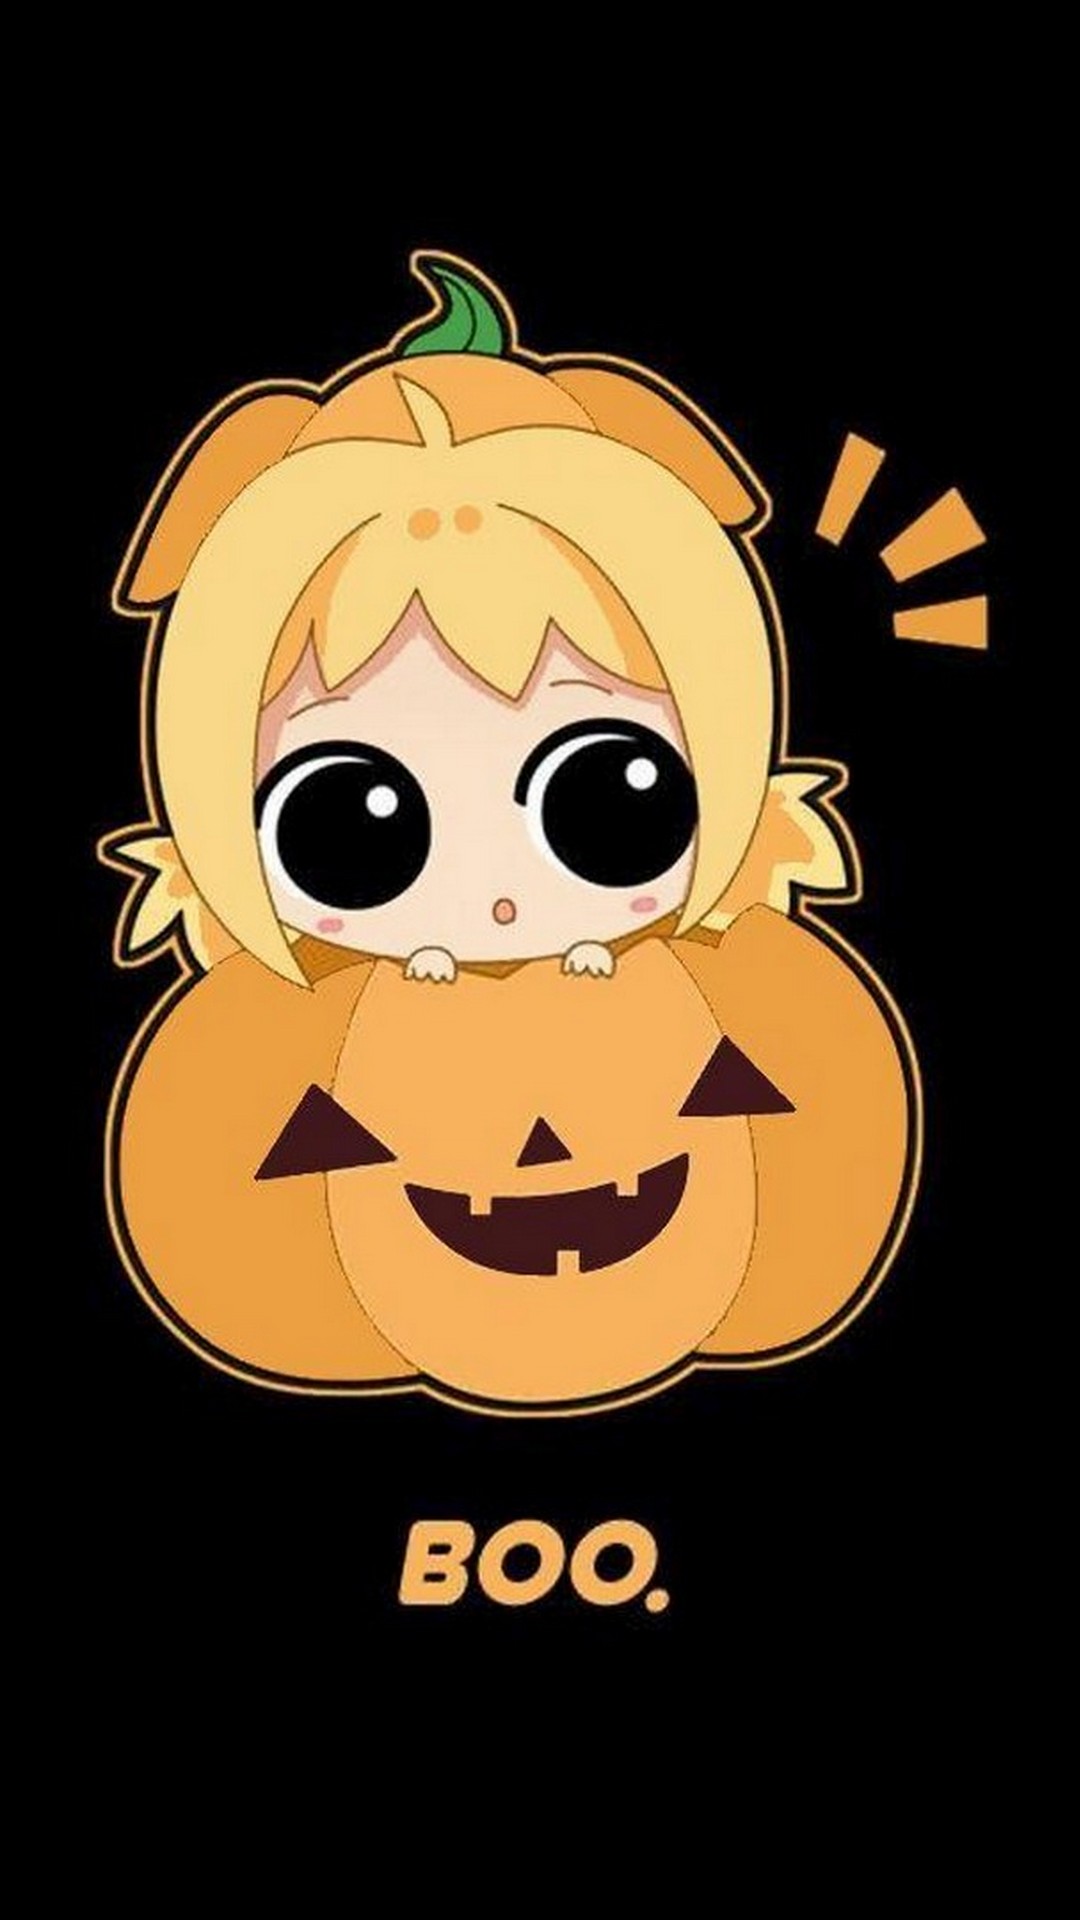 Cute Halloween Wallpaper iPhone With high-resolution 1080X1920 pixel. You can use this wallpaper for your iPhone 5, 6, 7, 8, X, XS, XR backgrounds, Mobile Screensaver, or iPad Lock Screen